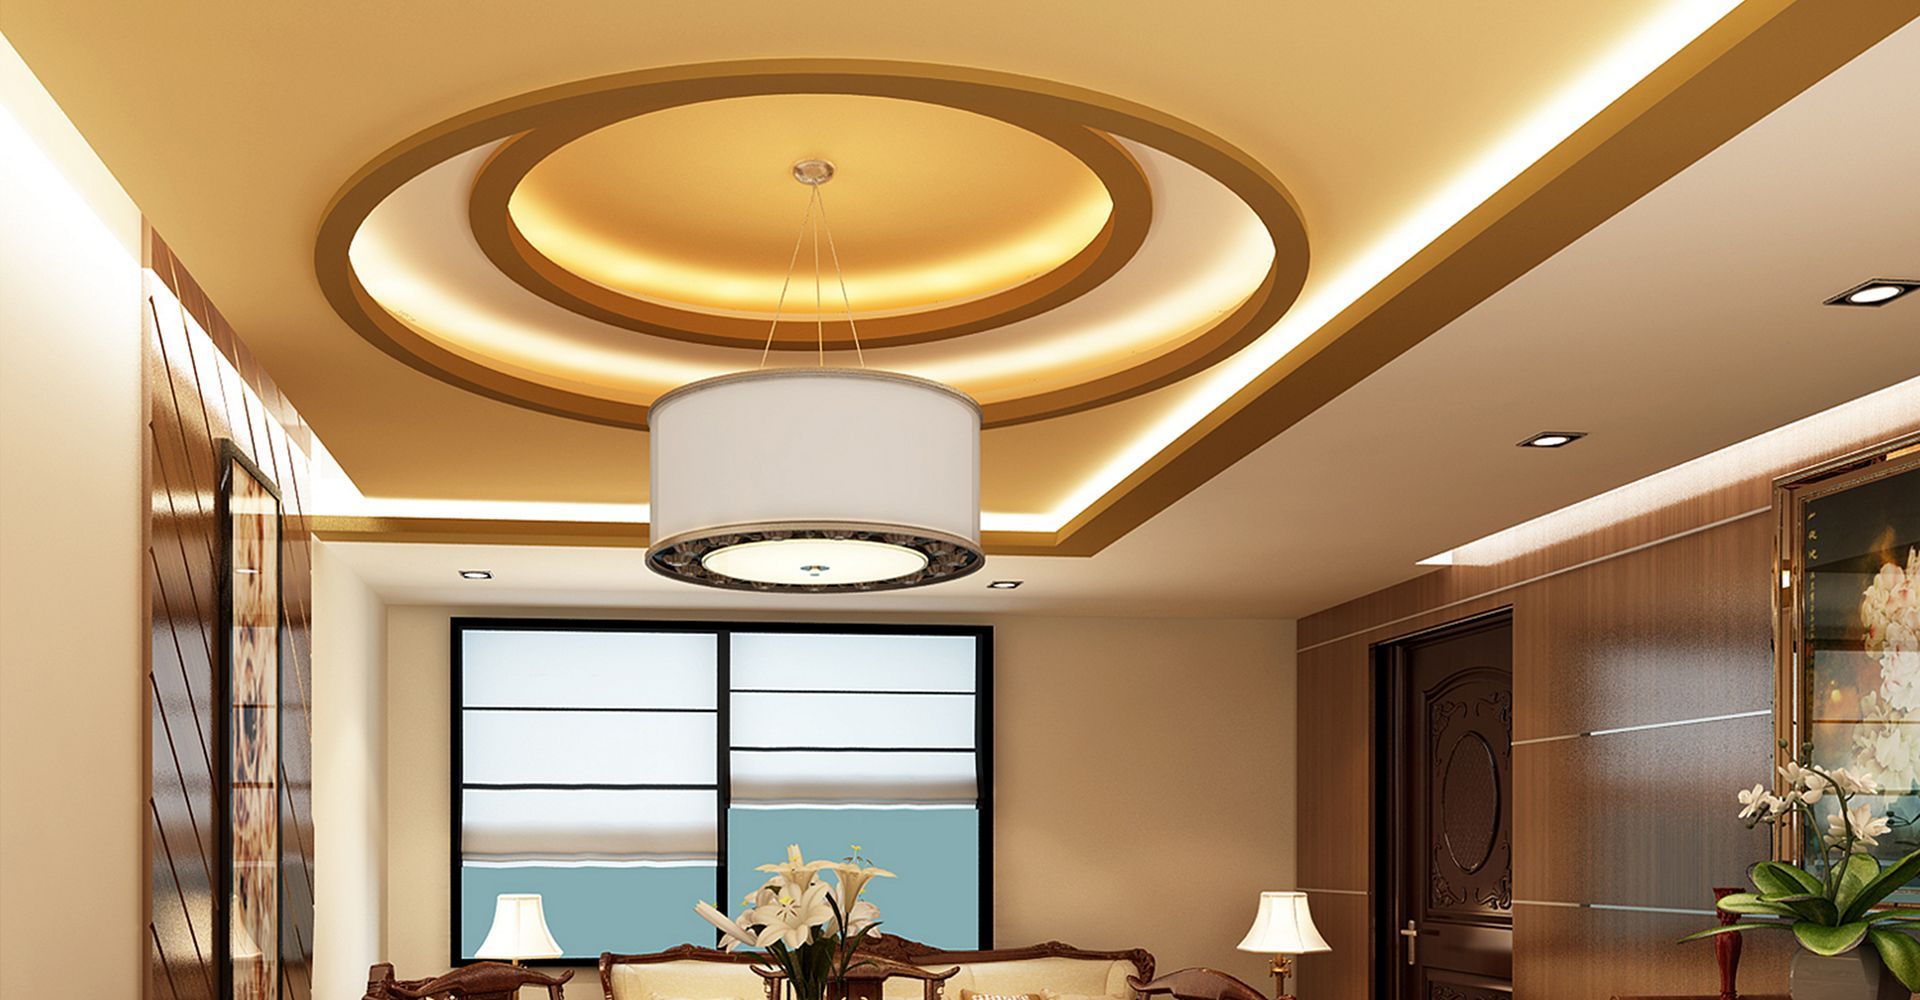 False celling with round lamp